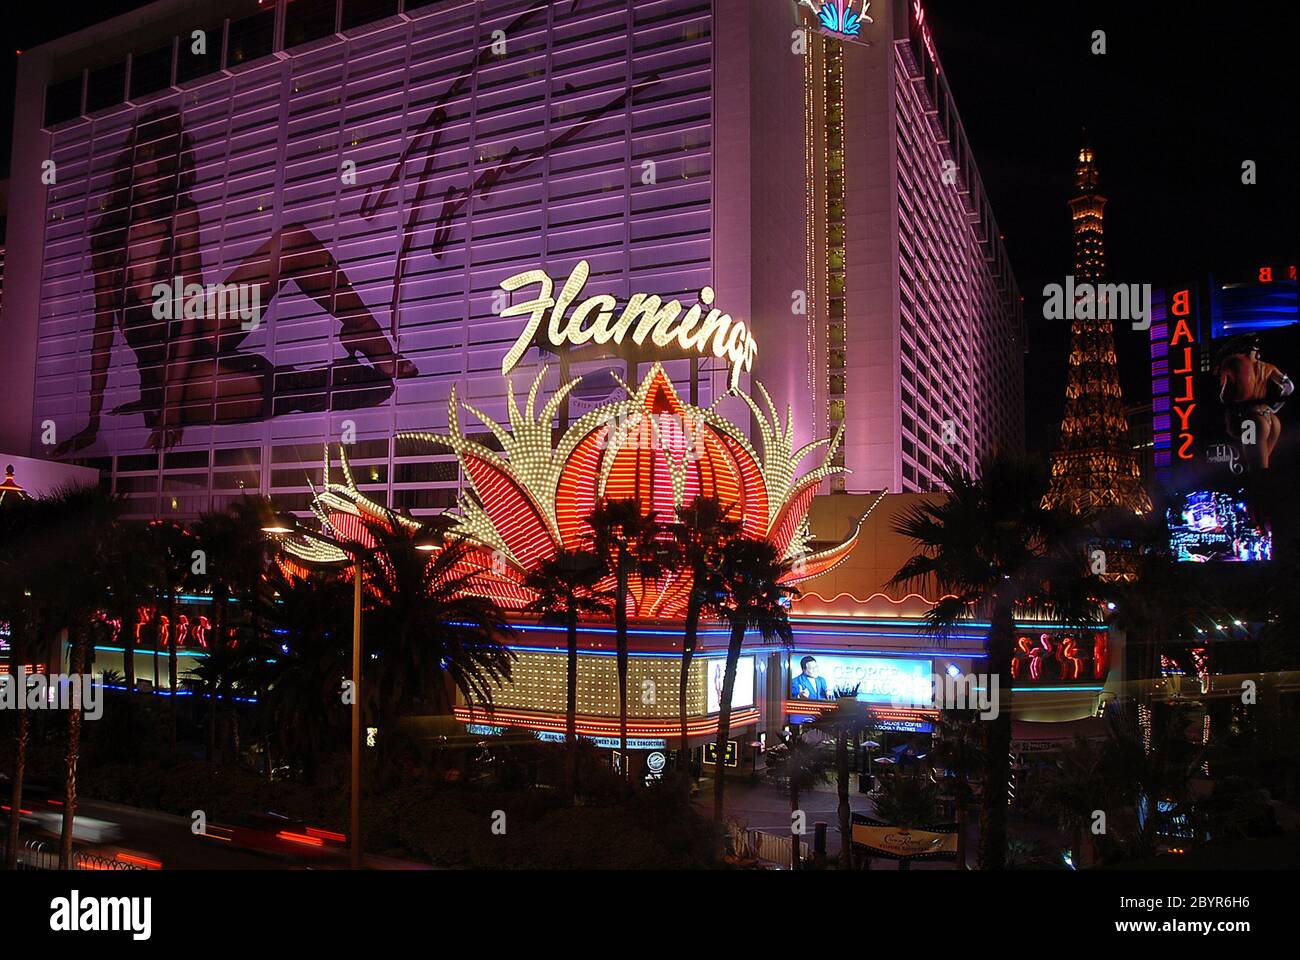 Flamingo Hotel Las Vegas 213 Hotel and most important places in Las Vegas The most beautiful place in Las Vegas Stock Photo